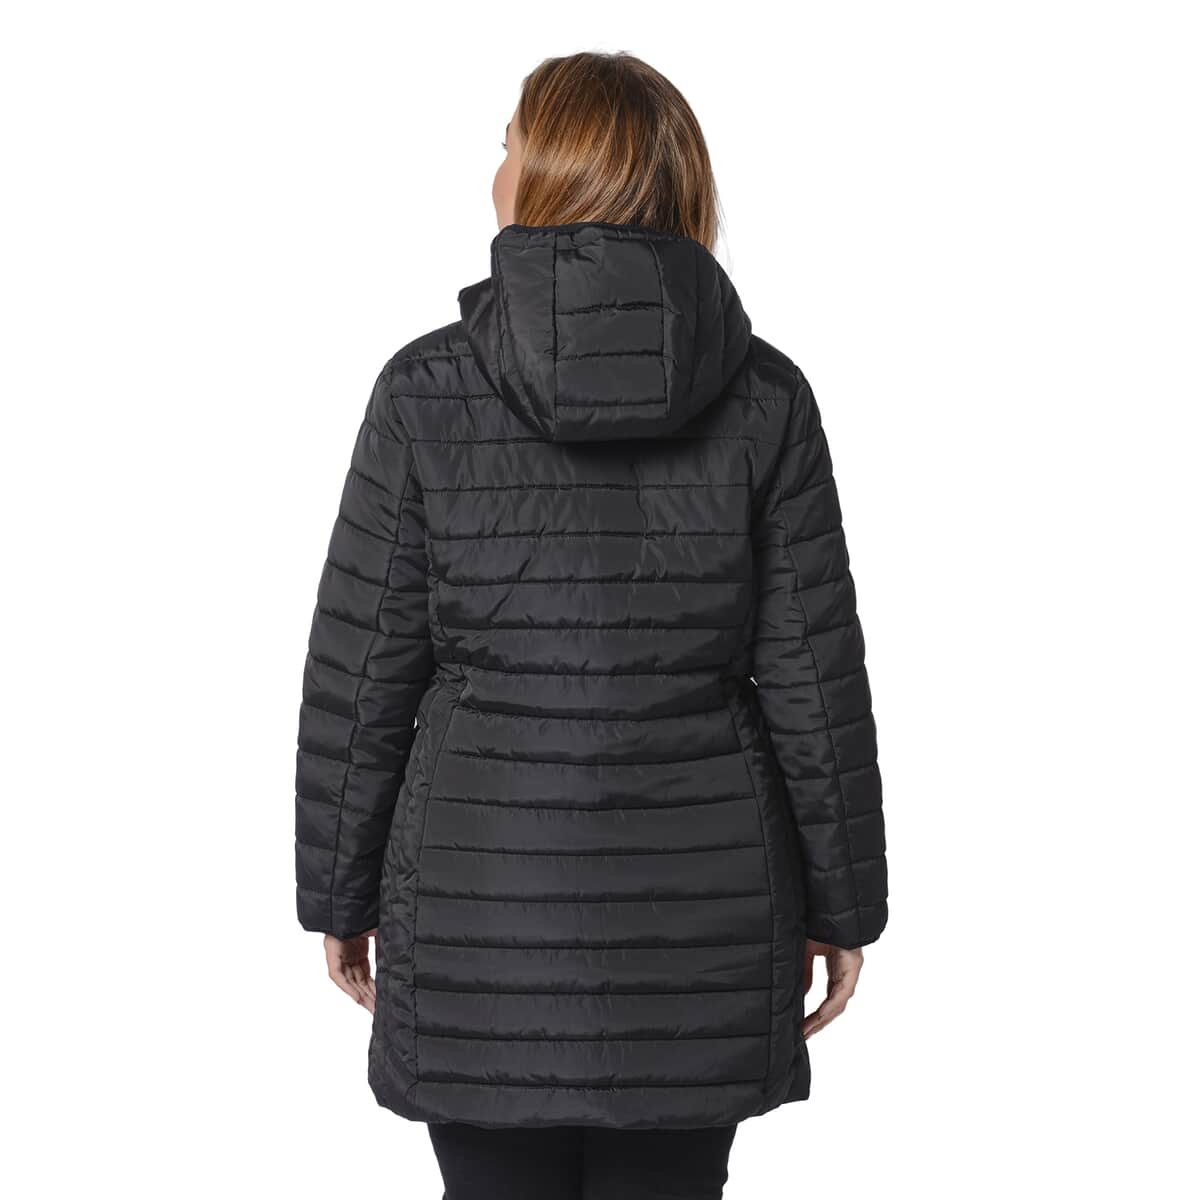 PASSAGE Black Long Puffer Coat with Hood (S, 100% Polyester) image number 1